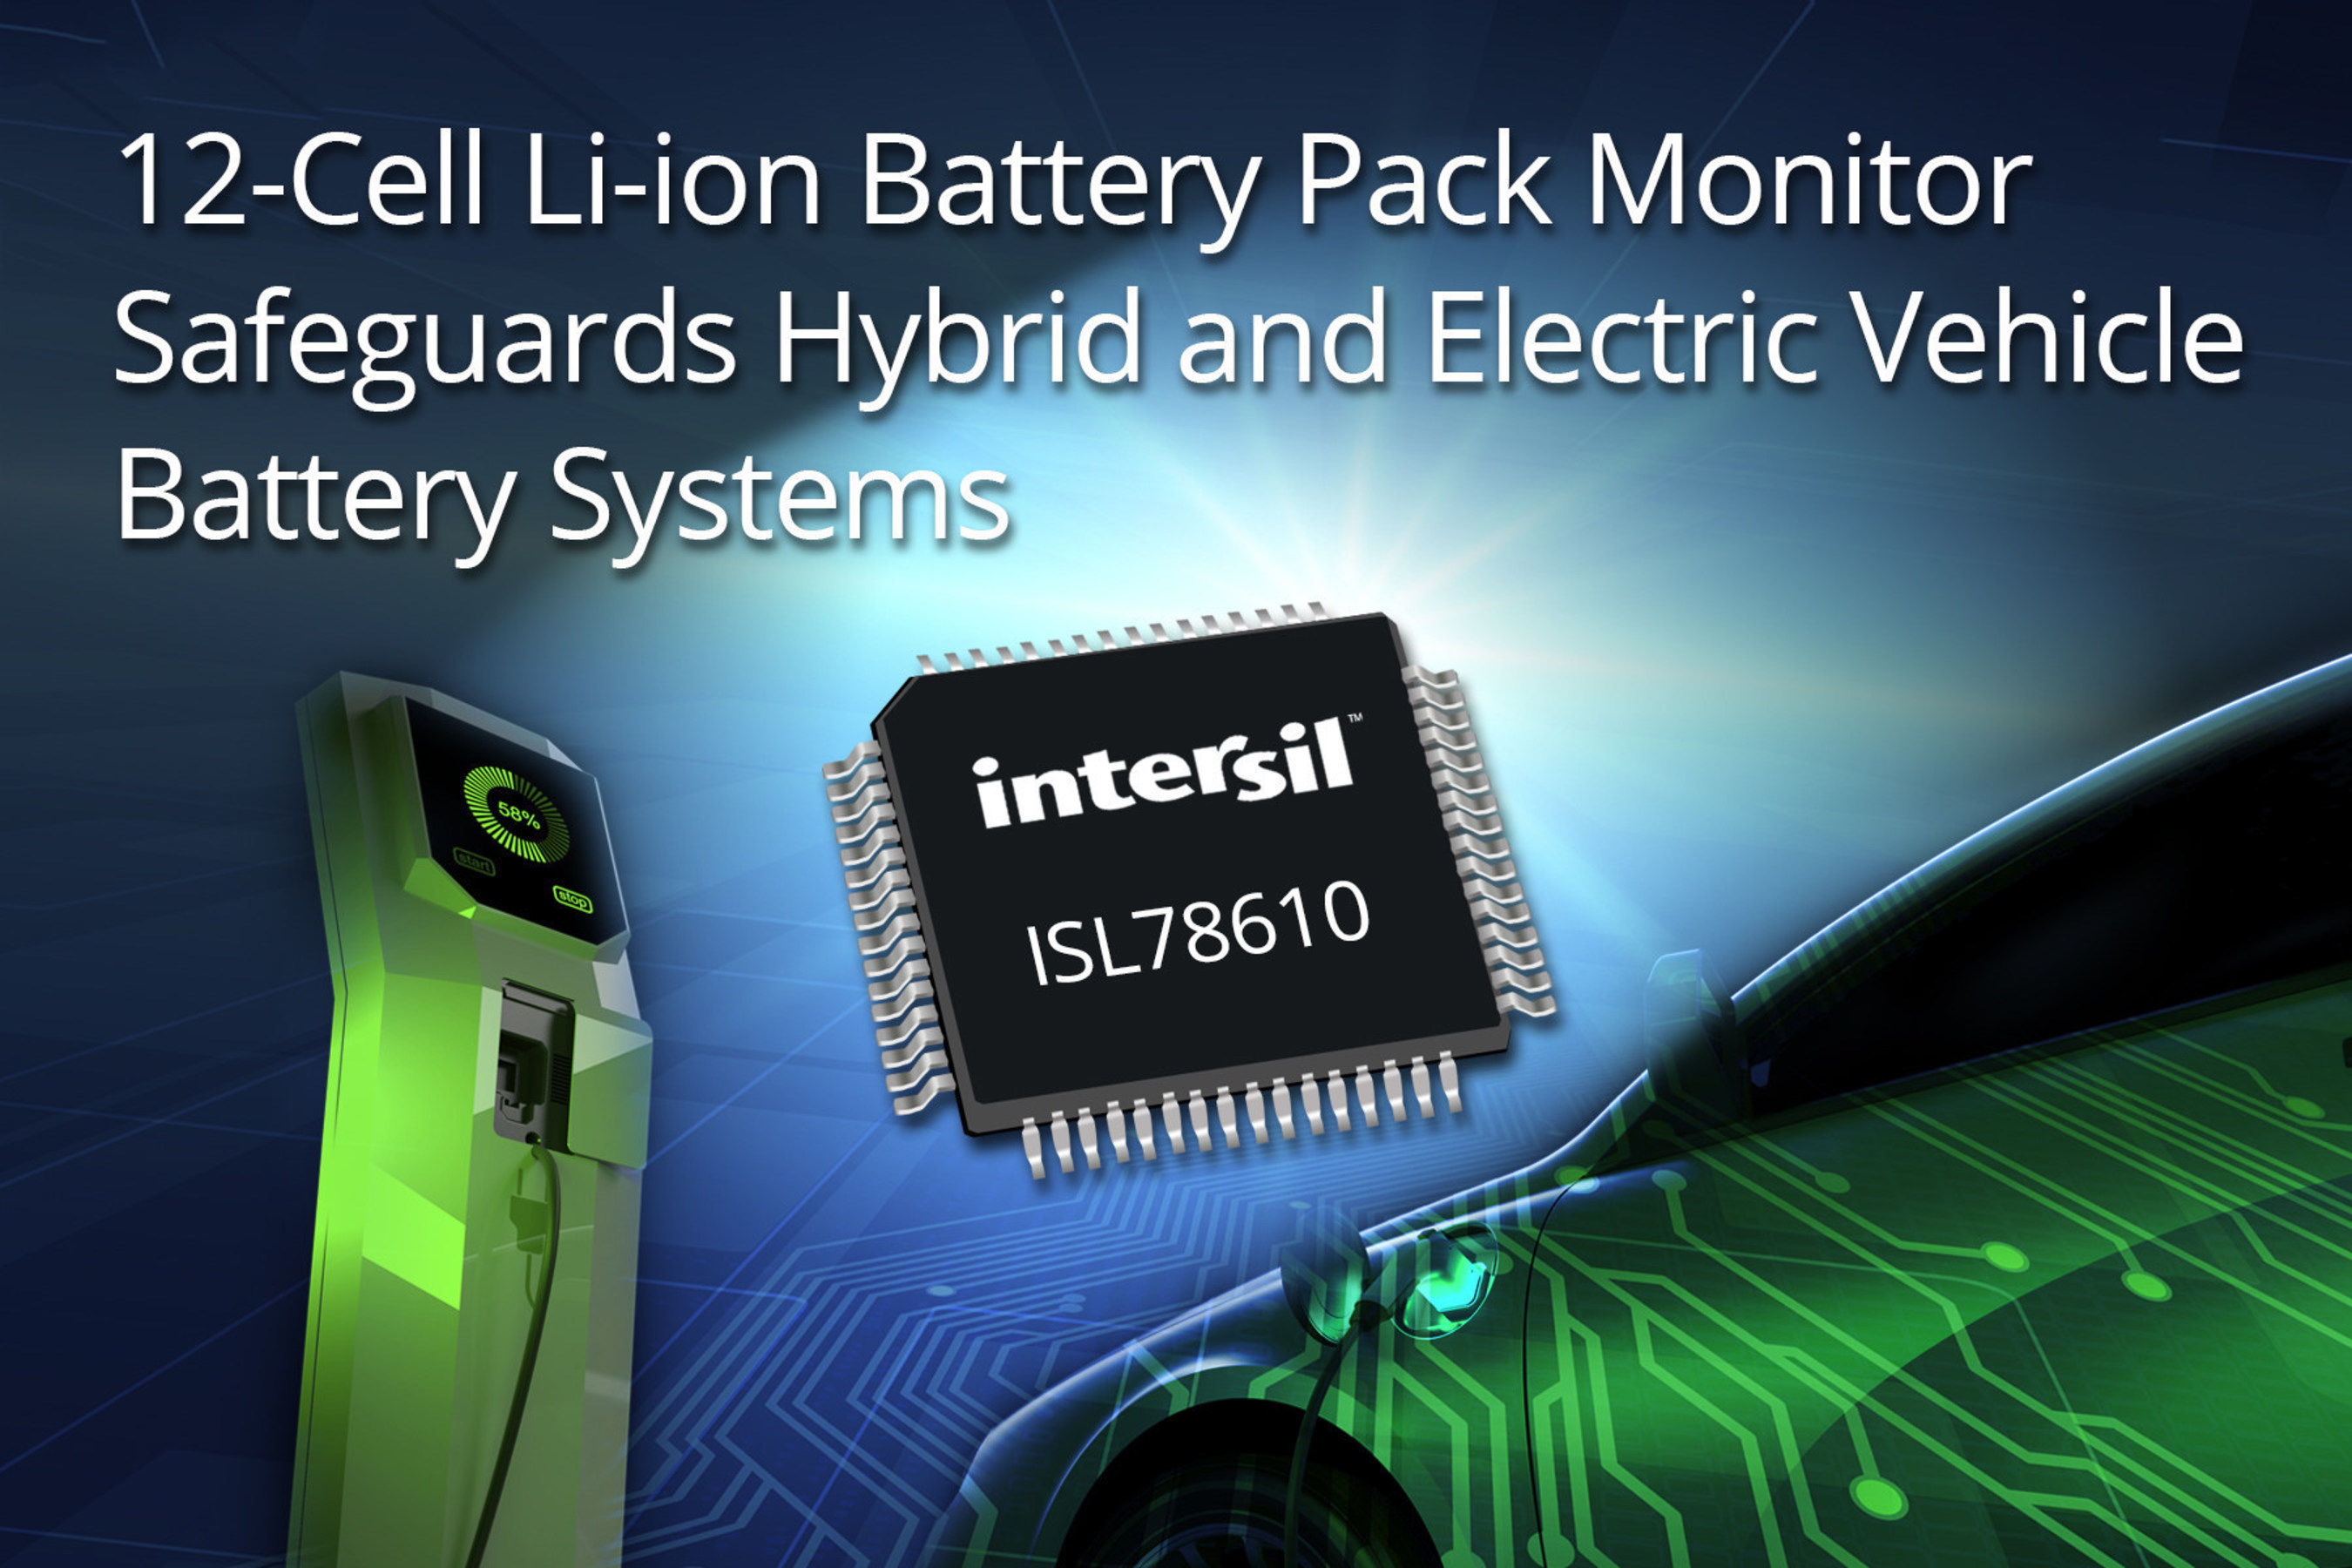 Intersil's 12-cell Li-ion battery pack monitor safeguards hybrid and electric vehicle battery systems. The automotive-grade ISL78610 battery monitor combines with the ISL78600 battery manager to enable ASIL-D compliant systems.